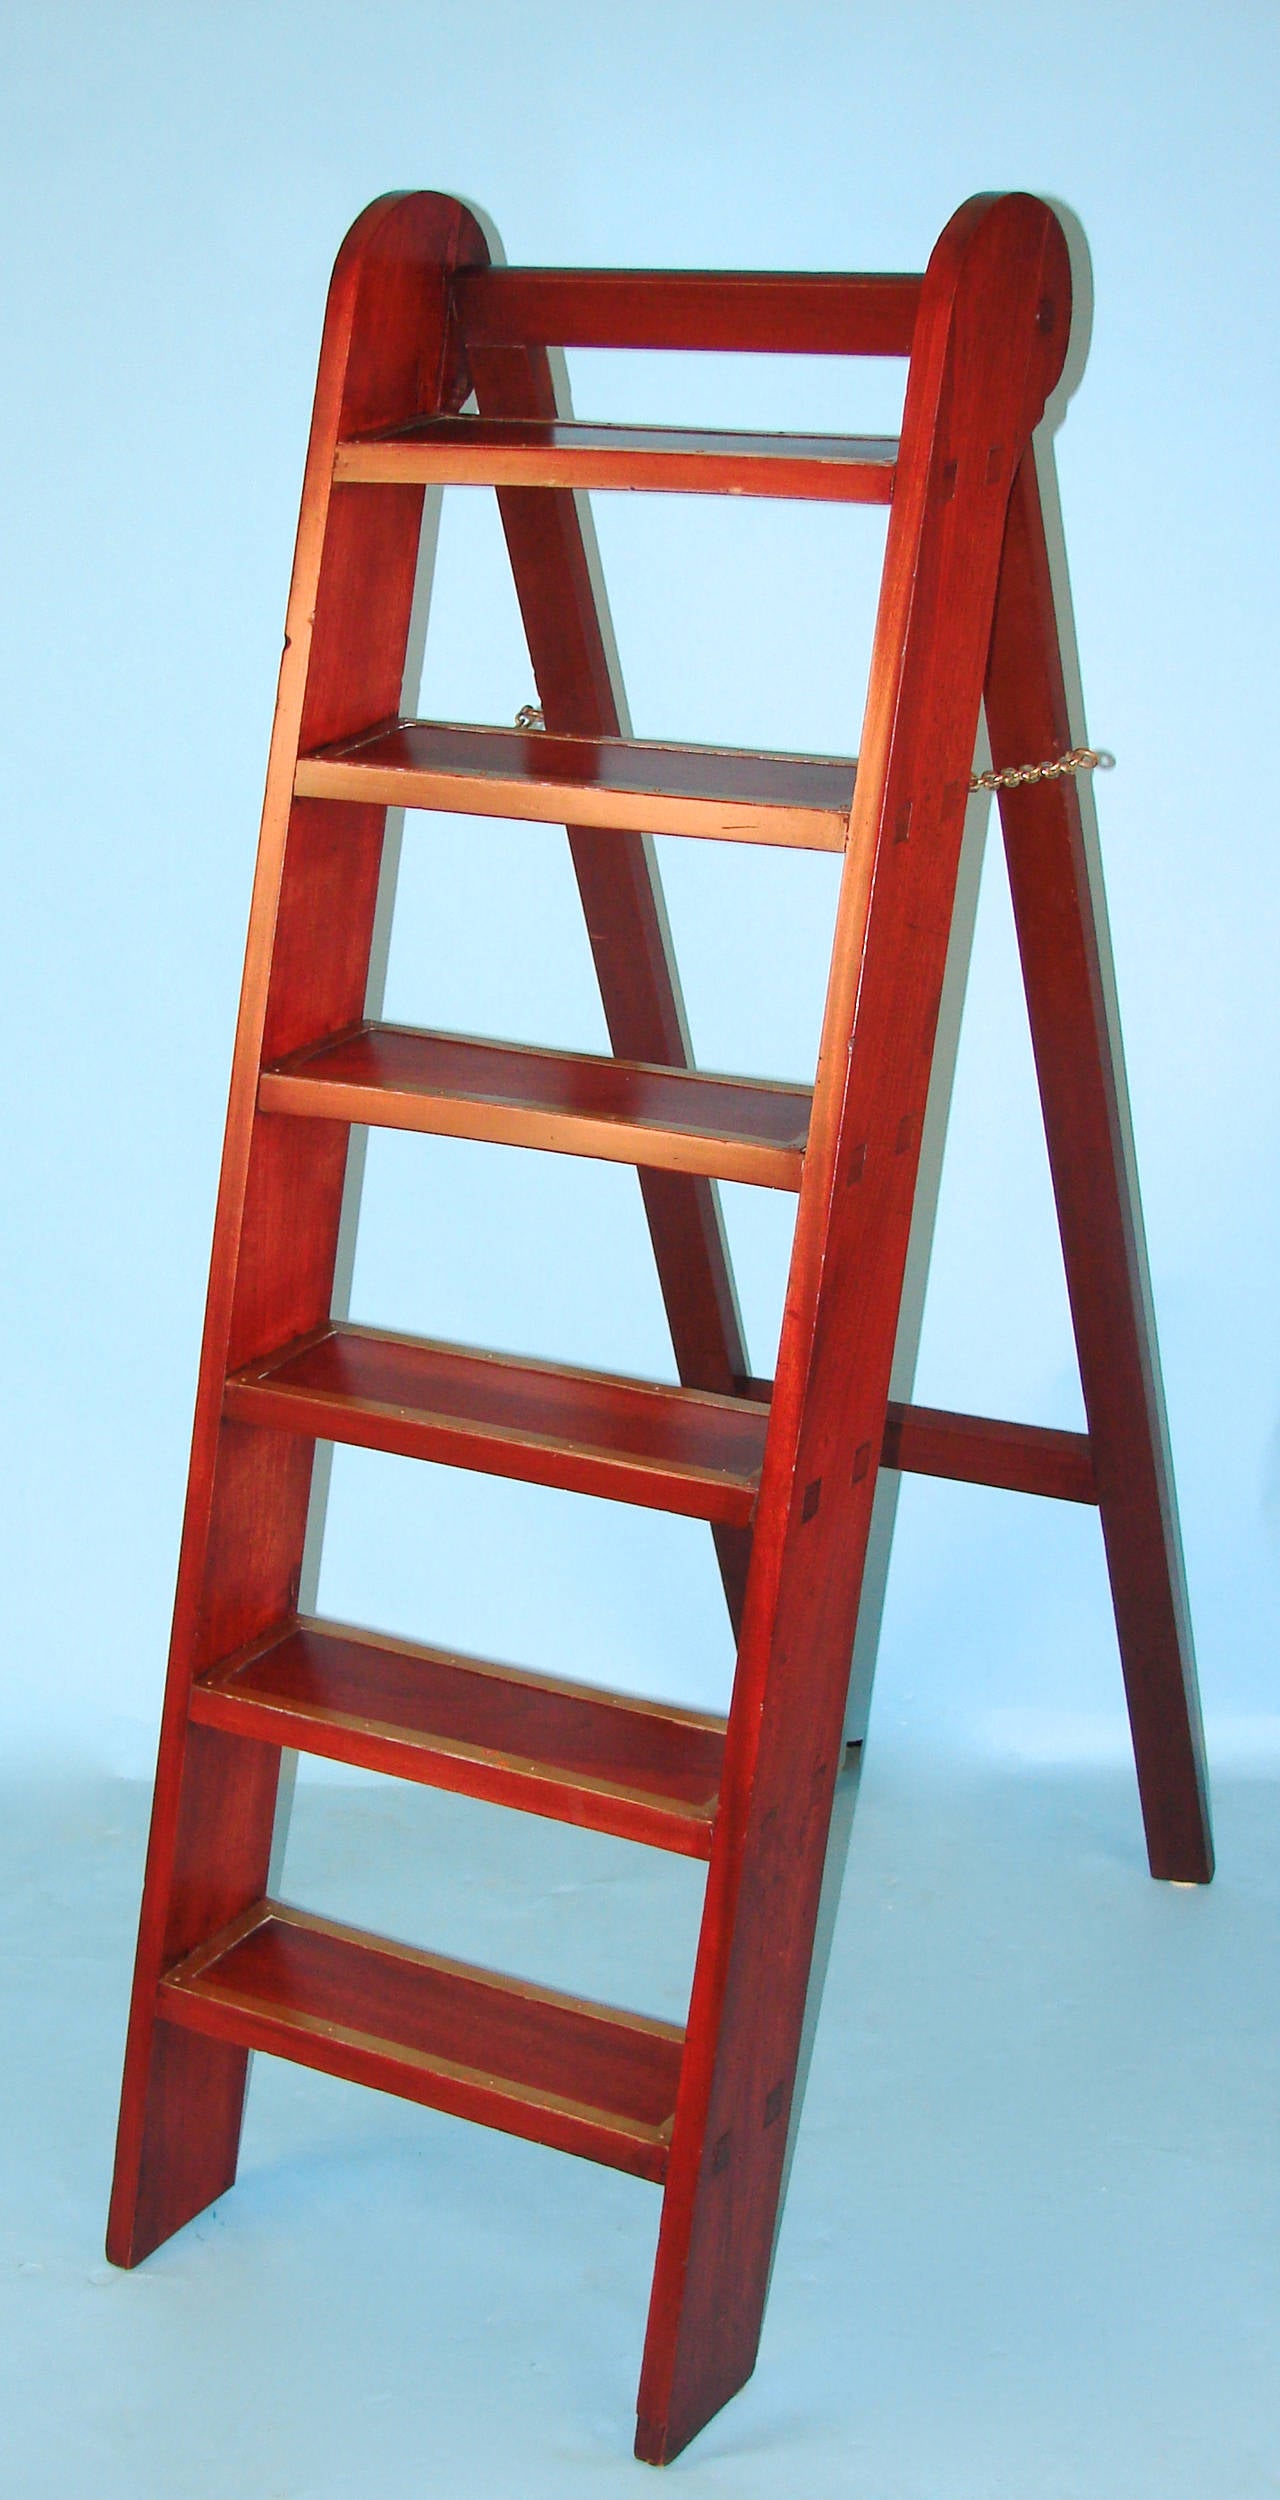 An English mahogany or padouk folding library ladder with six brass bound steps, each mortised through to the sides, circa 1880.